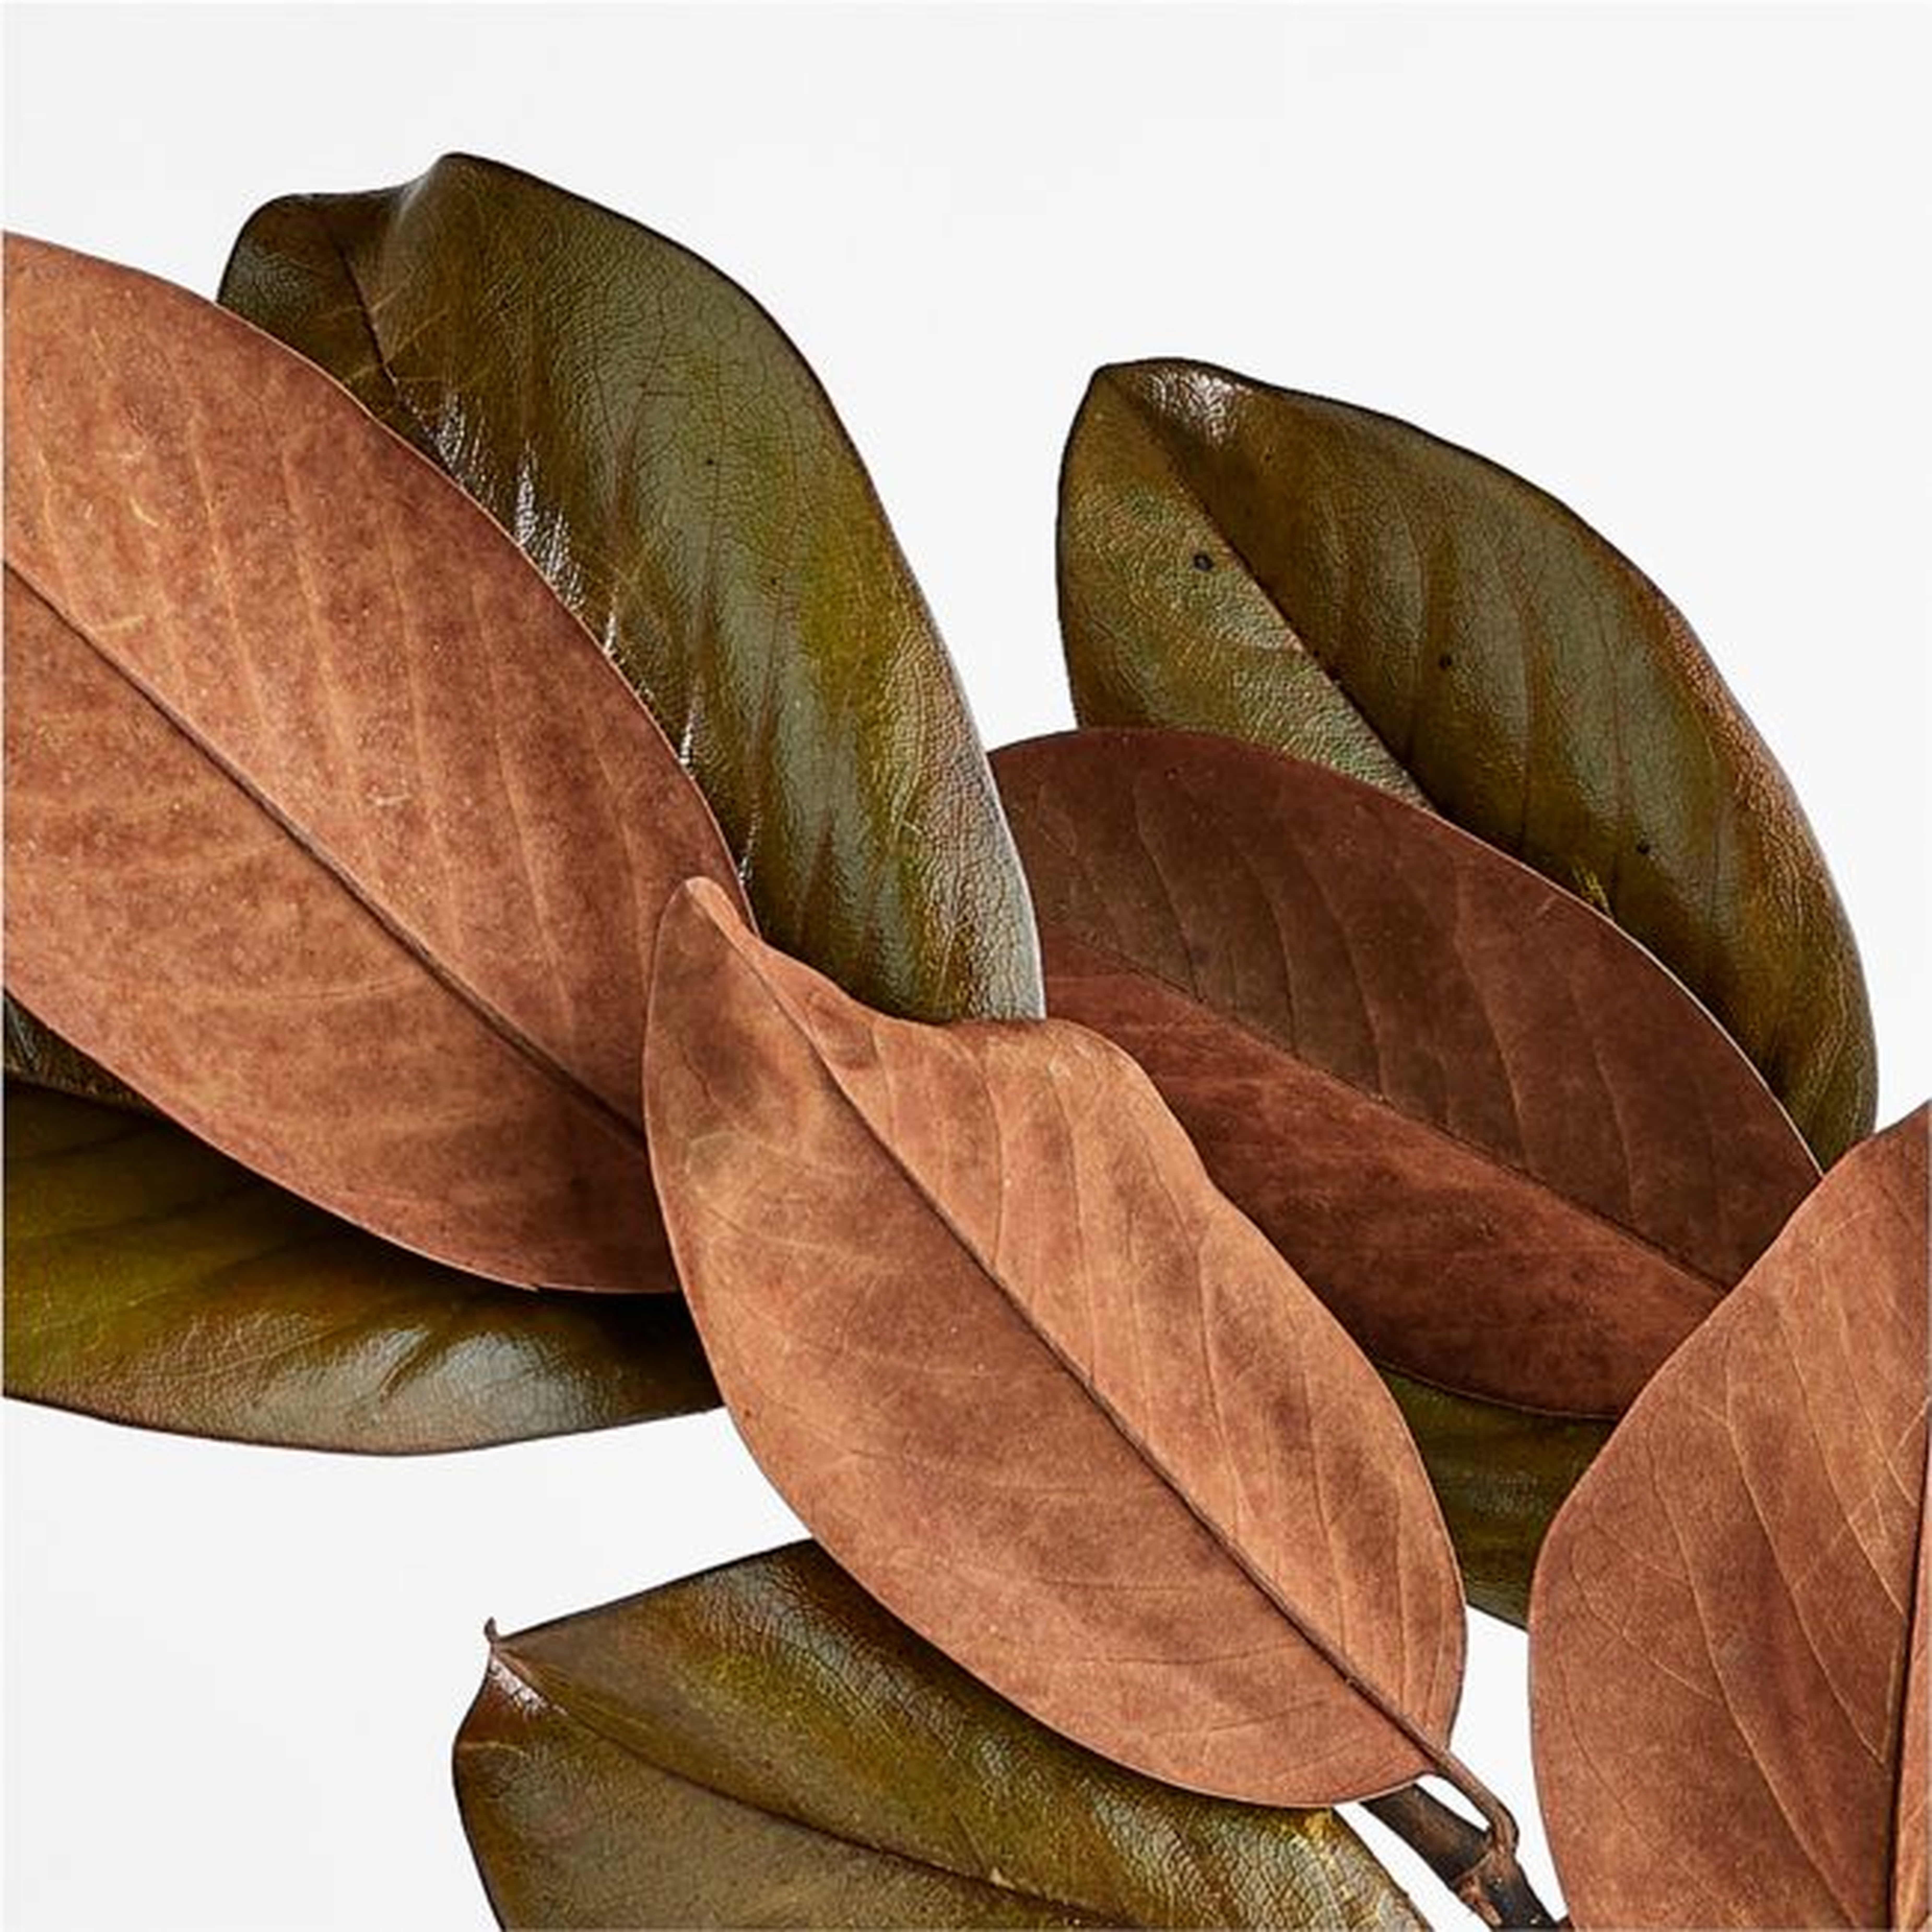 Dried Magnolia Leaf Bunch - Crate and Barrel